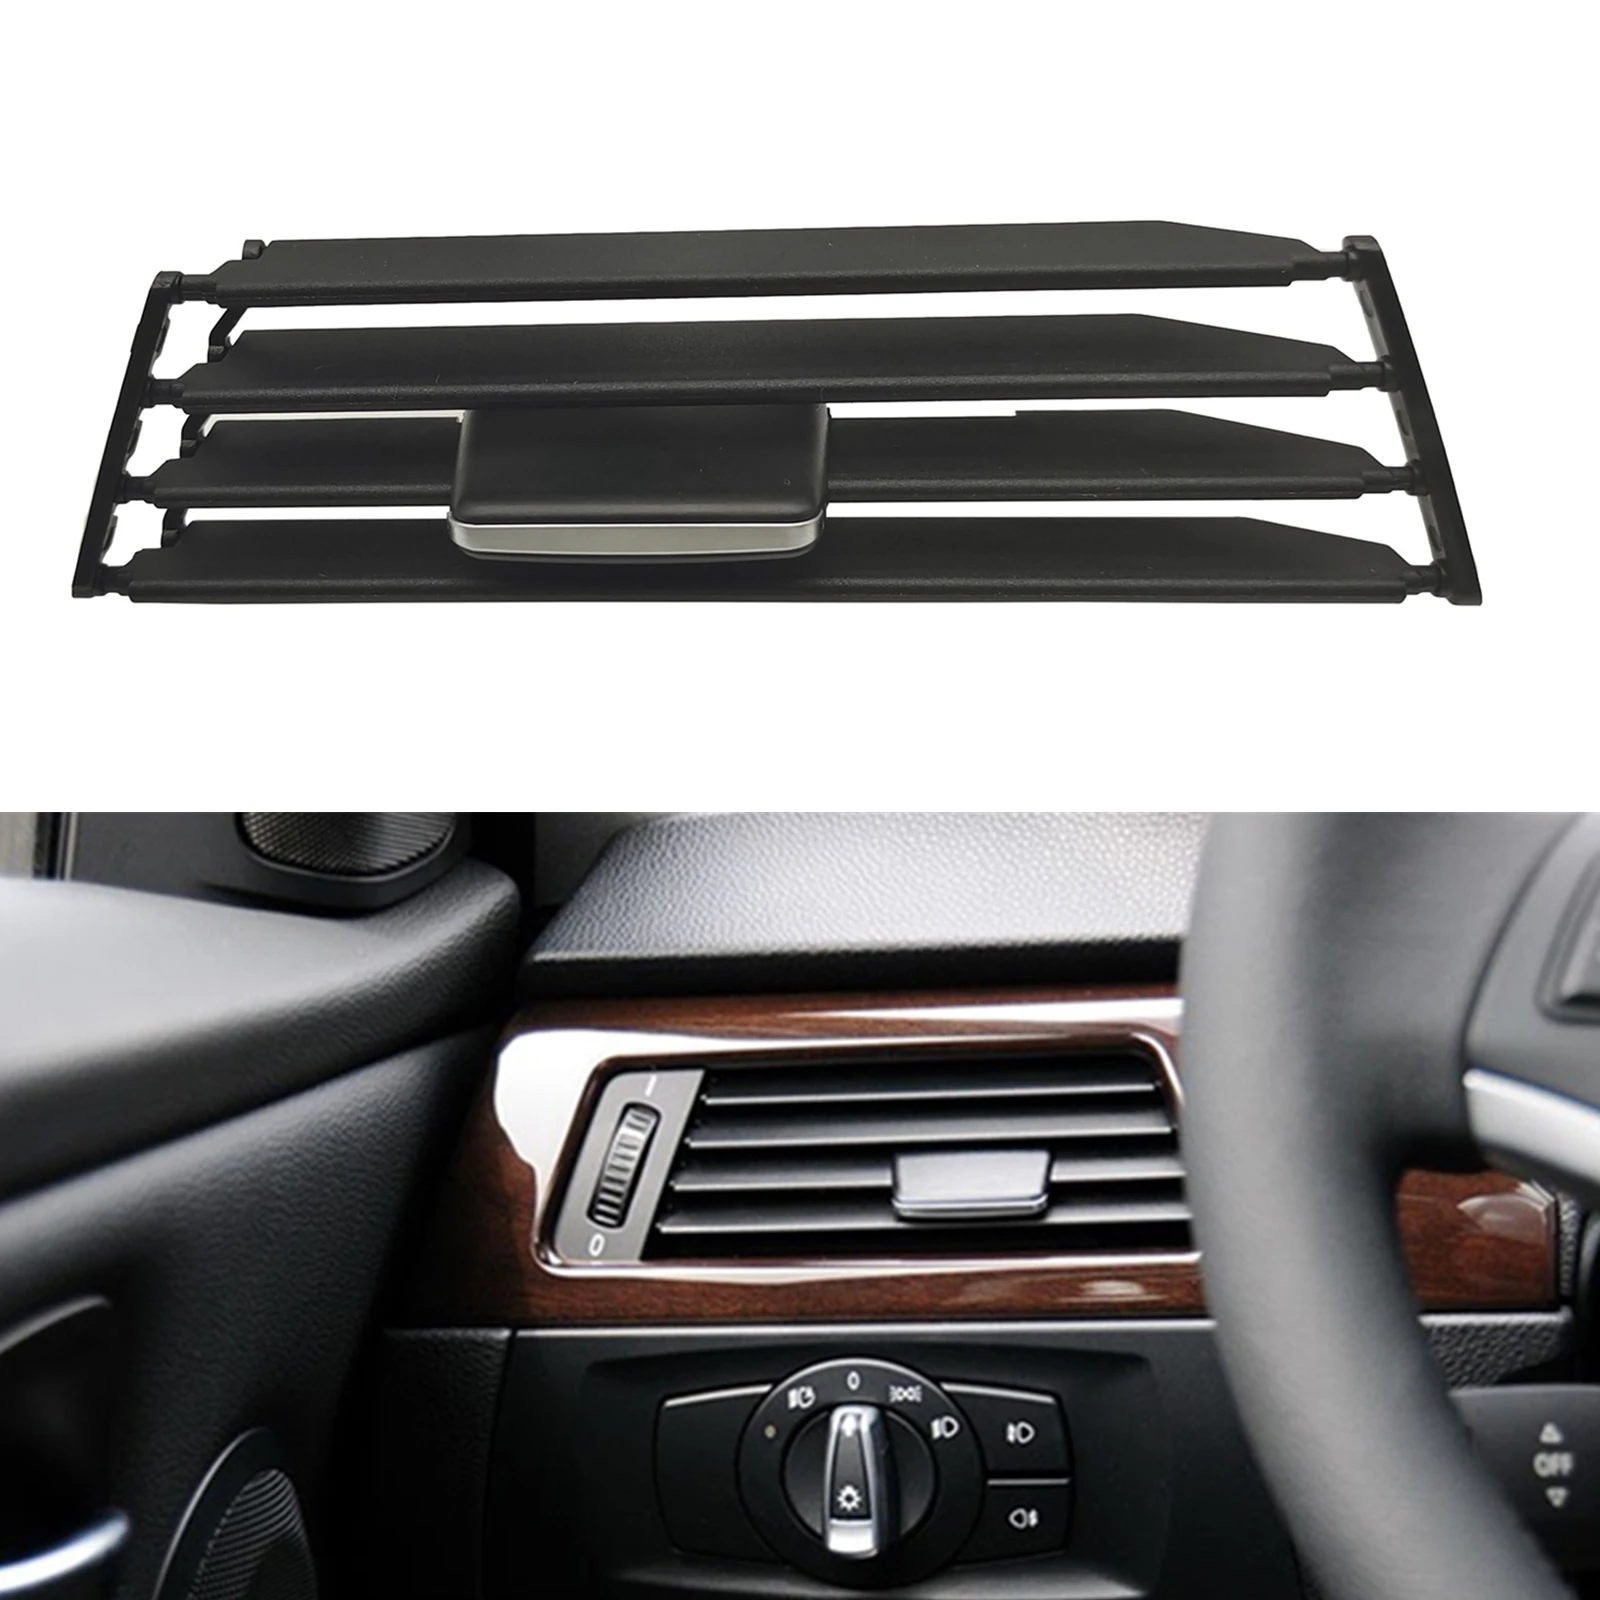 

For BMW E90 E91 E92 E93 3-Series M3 2005-2012 Right/Left Conditioning Duct Grill Trim Car Front Side A/C Air Vent Grille Outlet